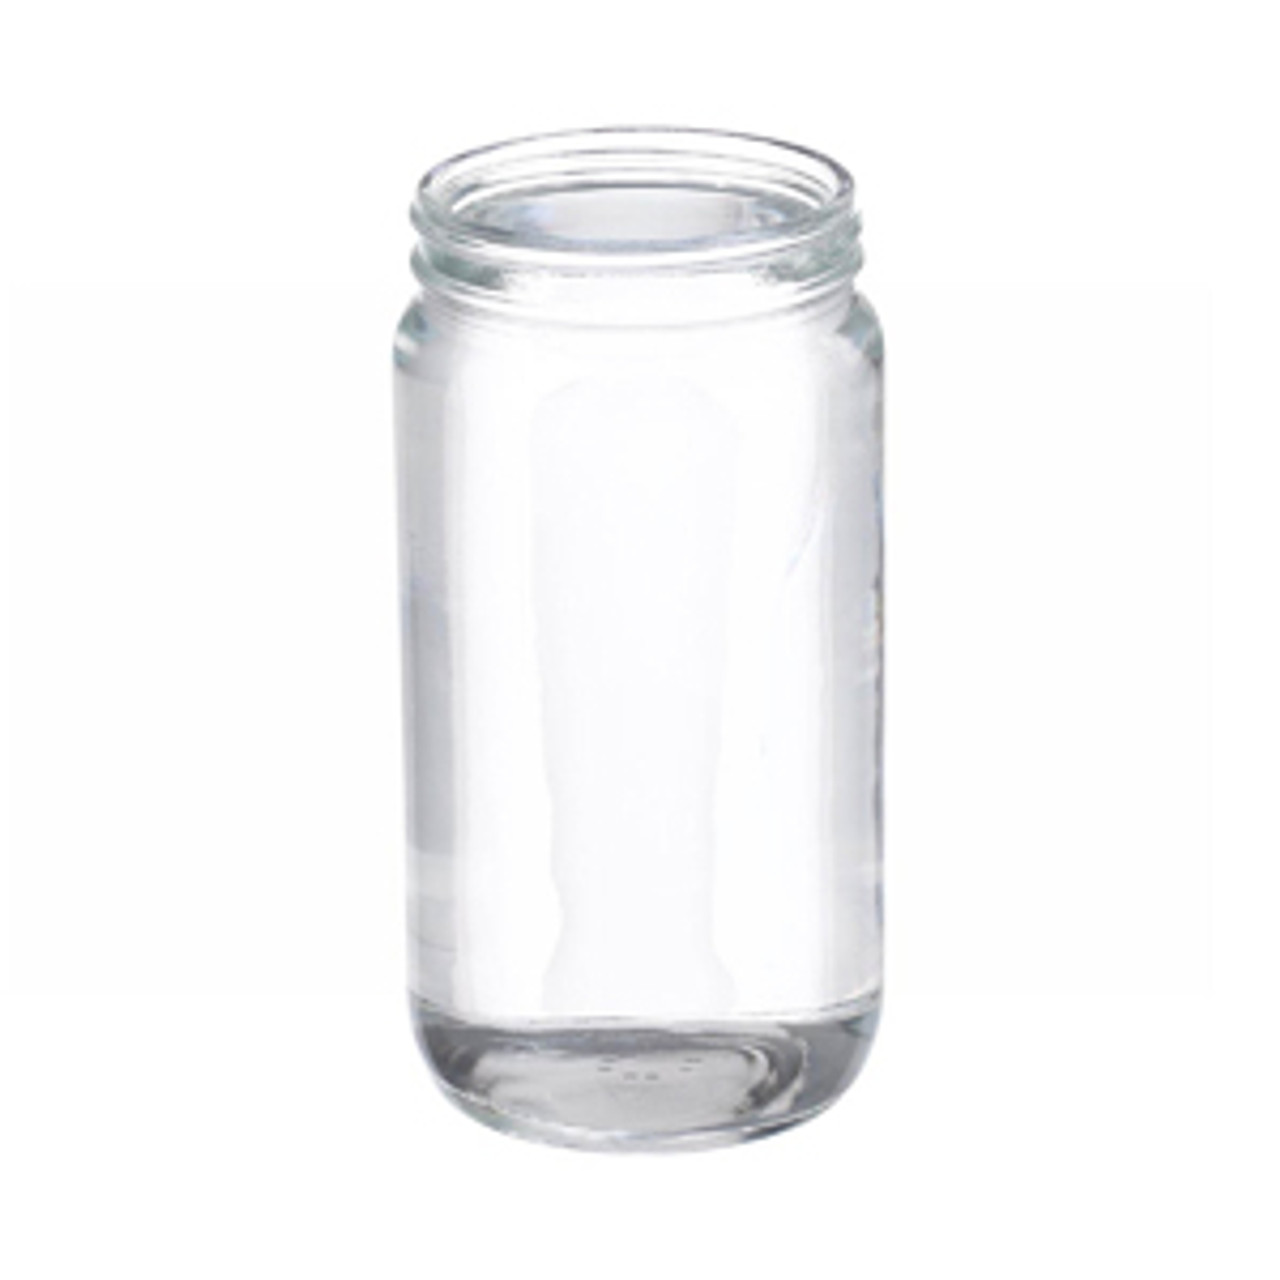 16 oz. French Square Bottle 48-400